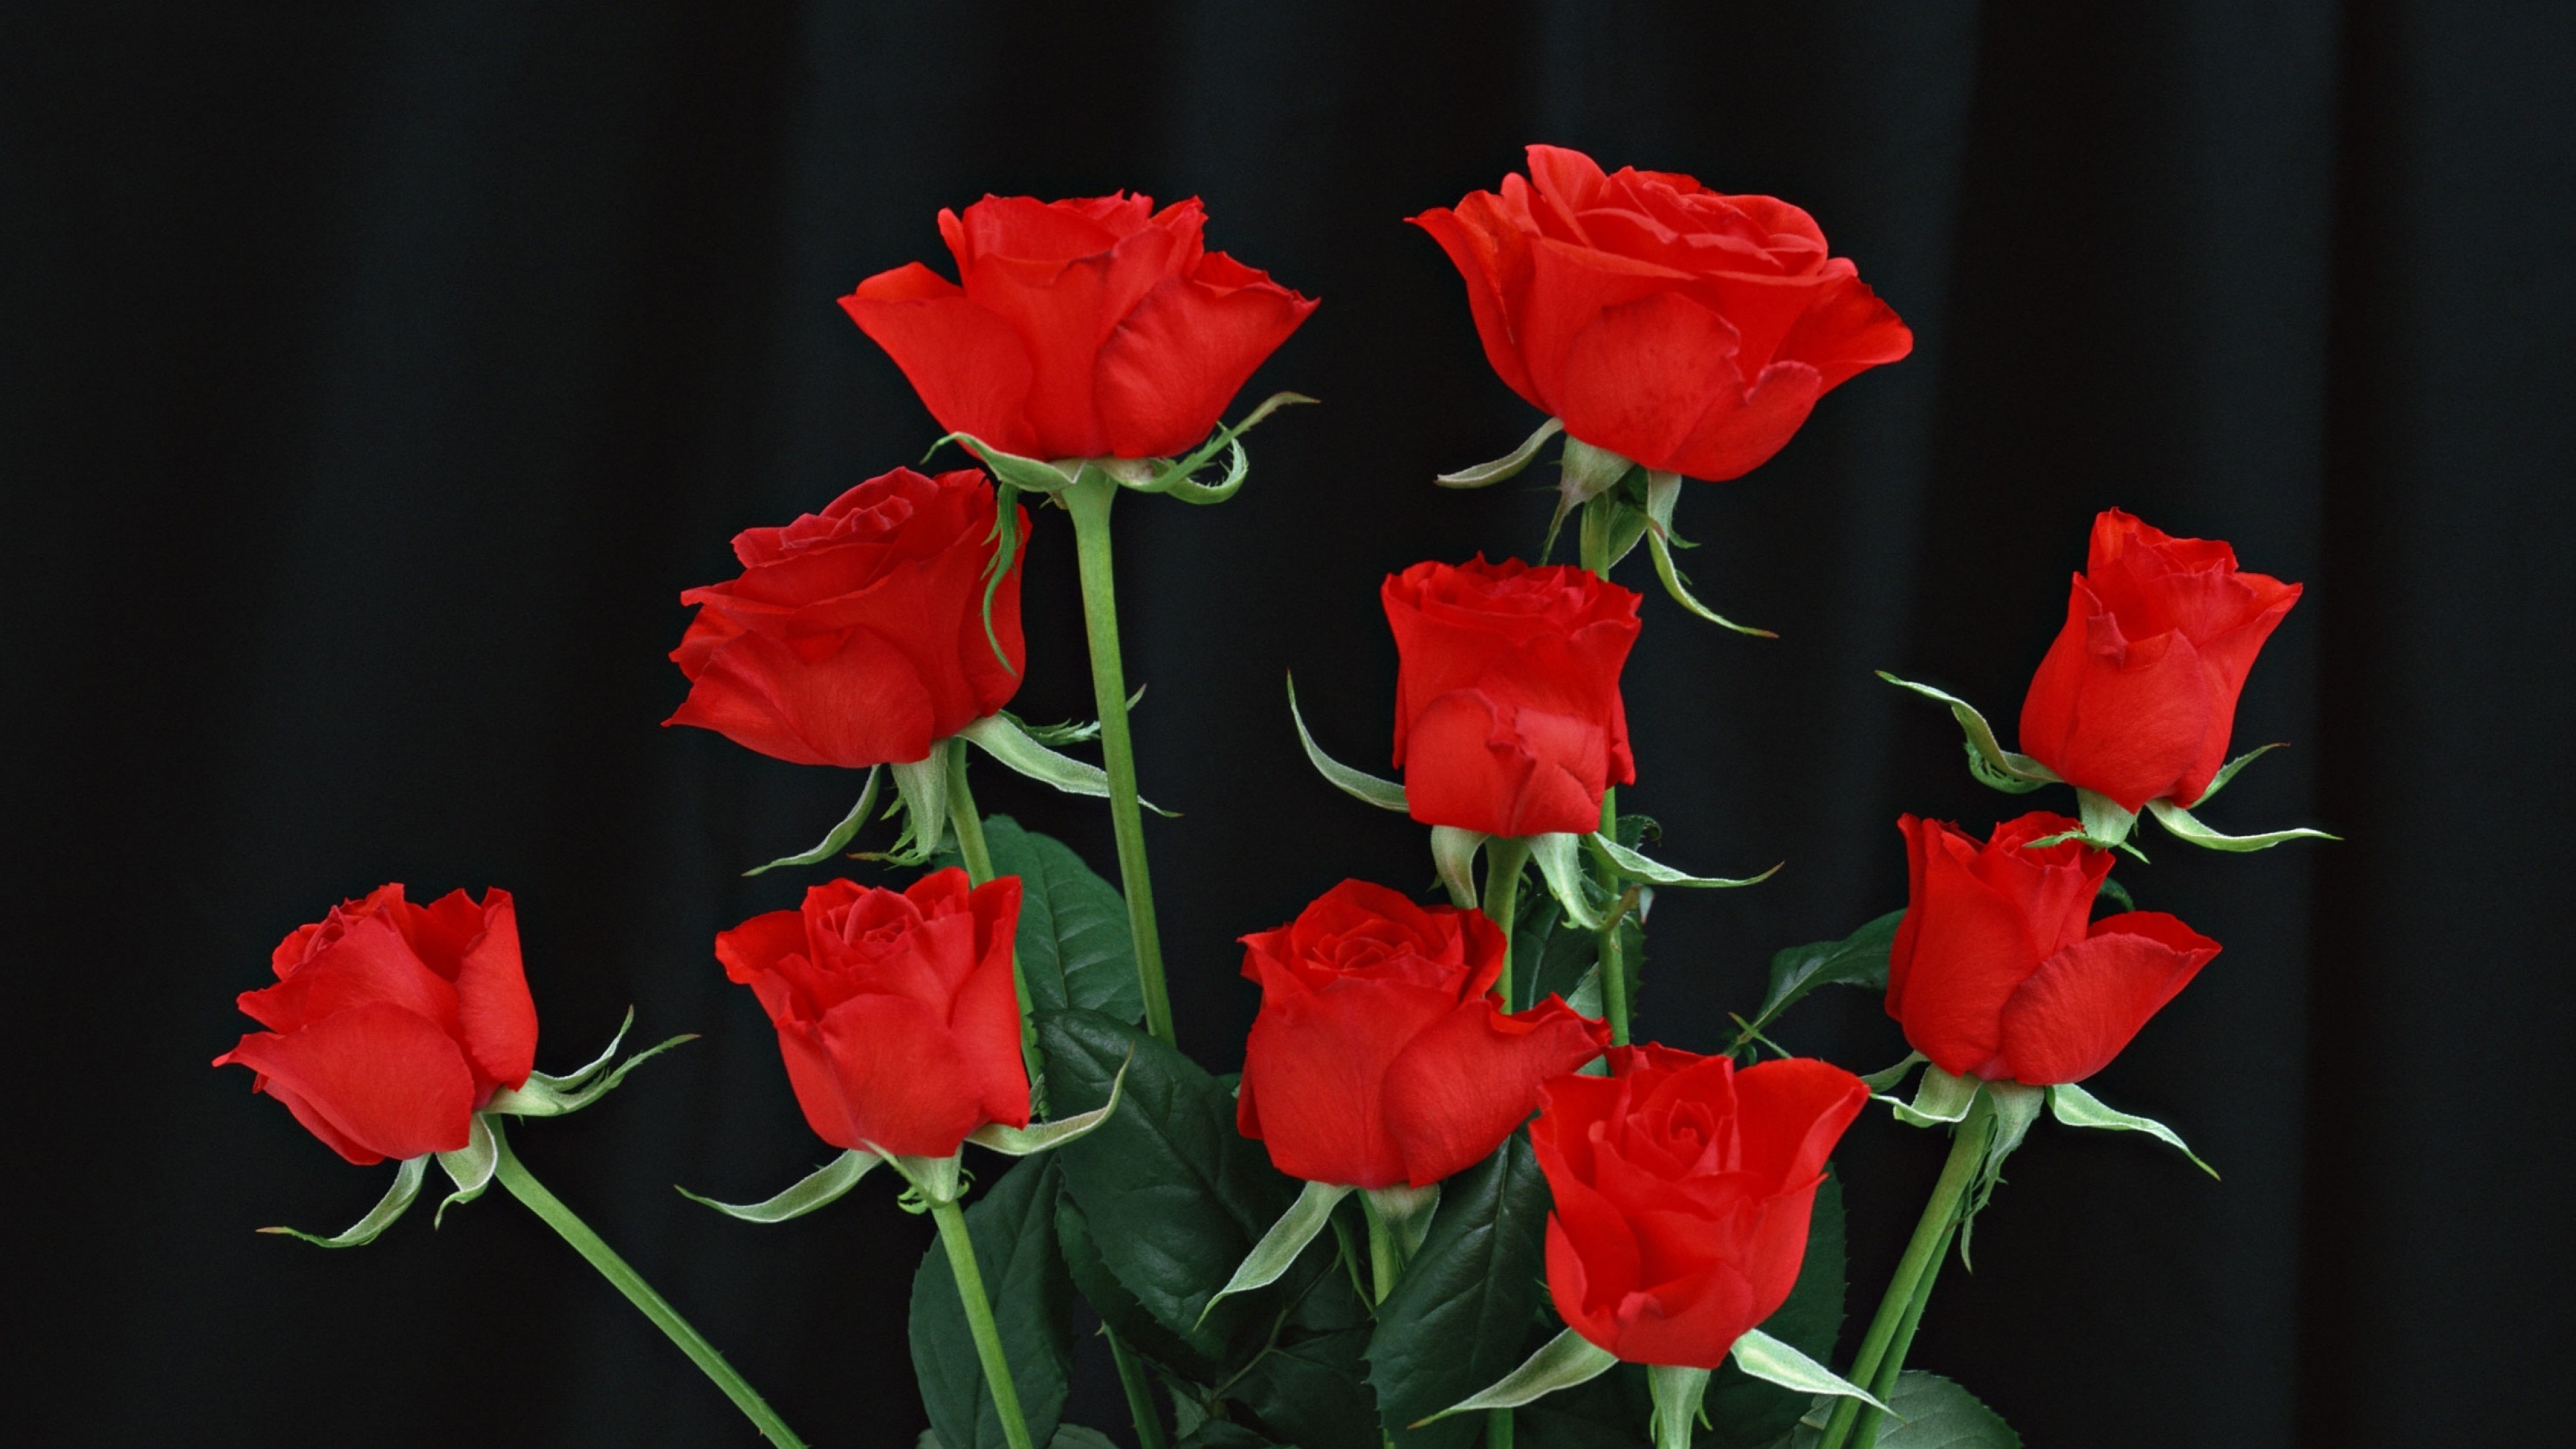 3840x2160  Wallpaper red roses, black background, flowers